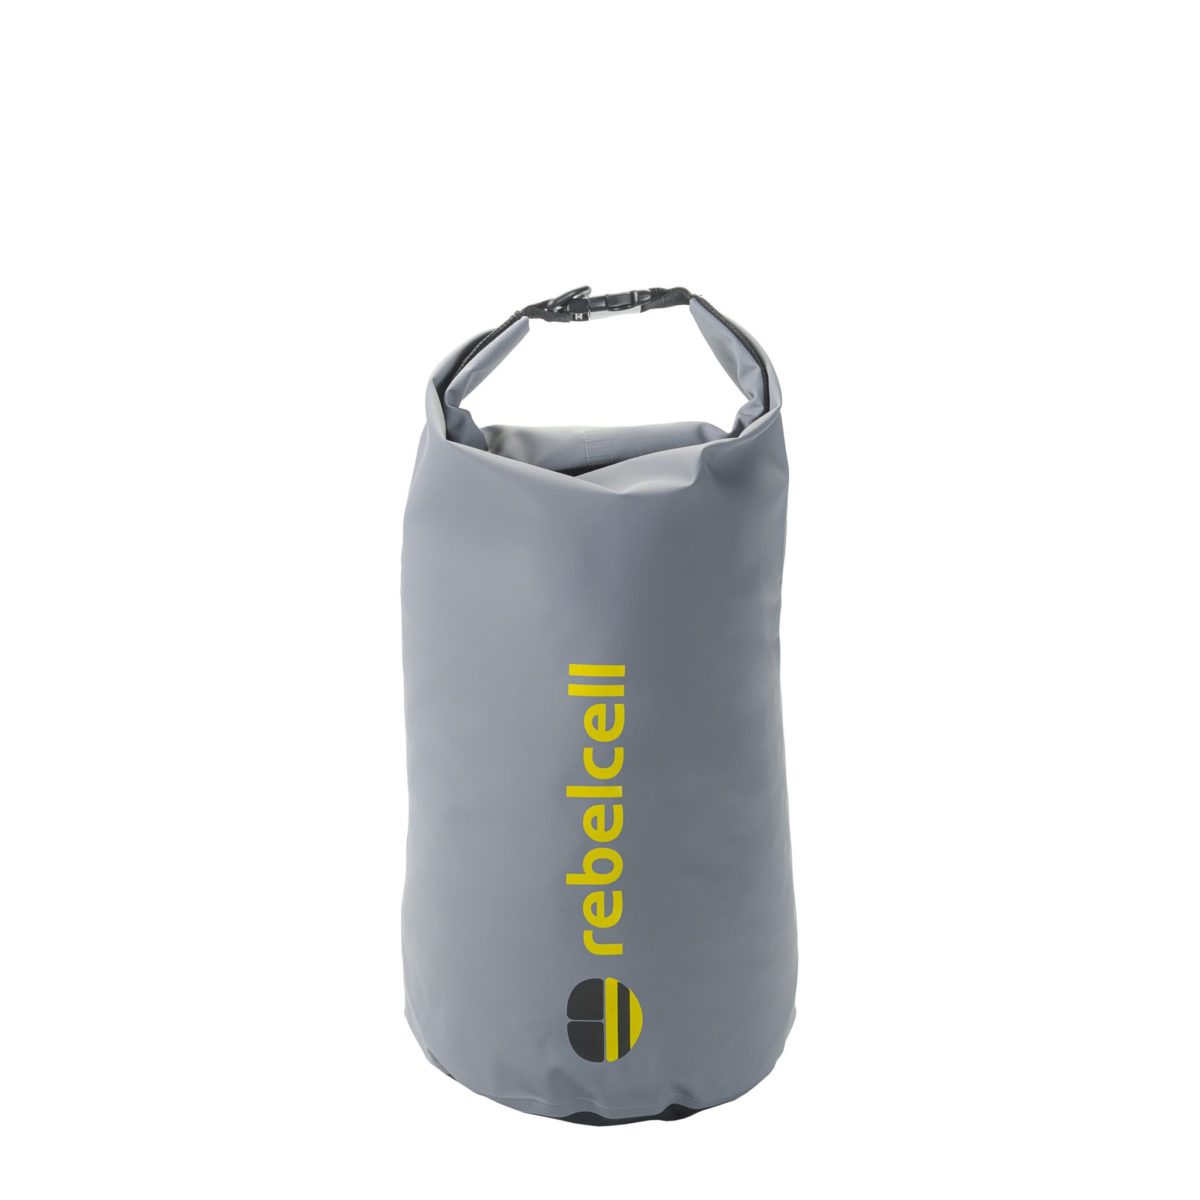 Rebelcell Dry Bag Medium (15L) product image